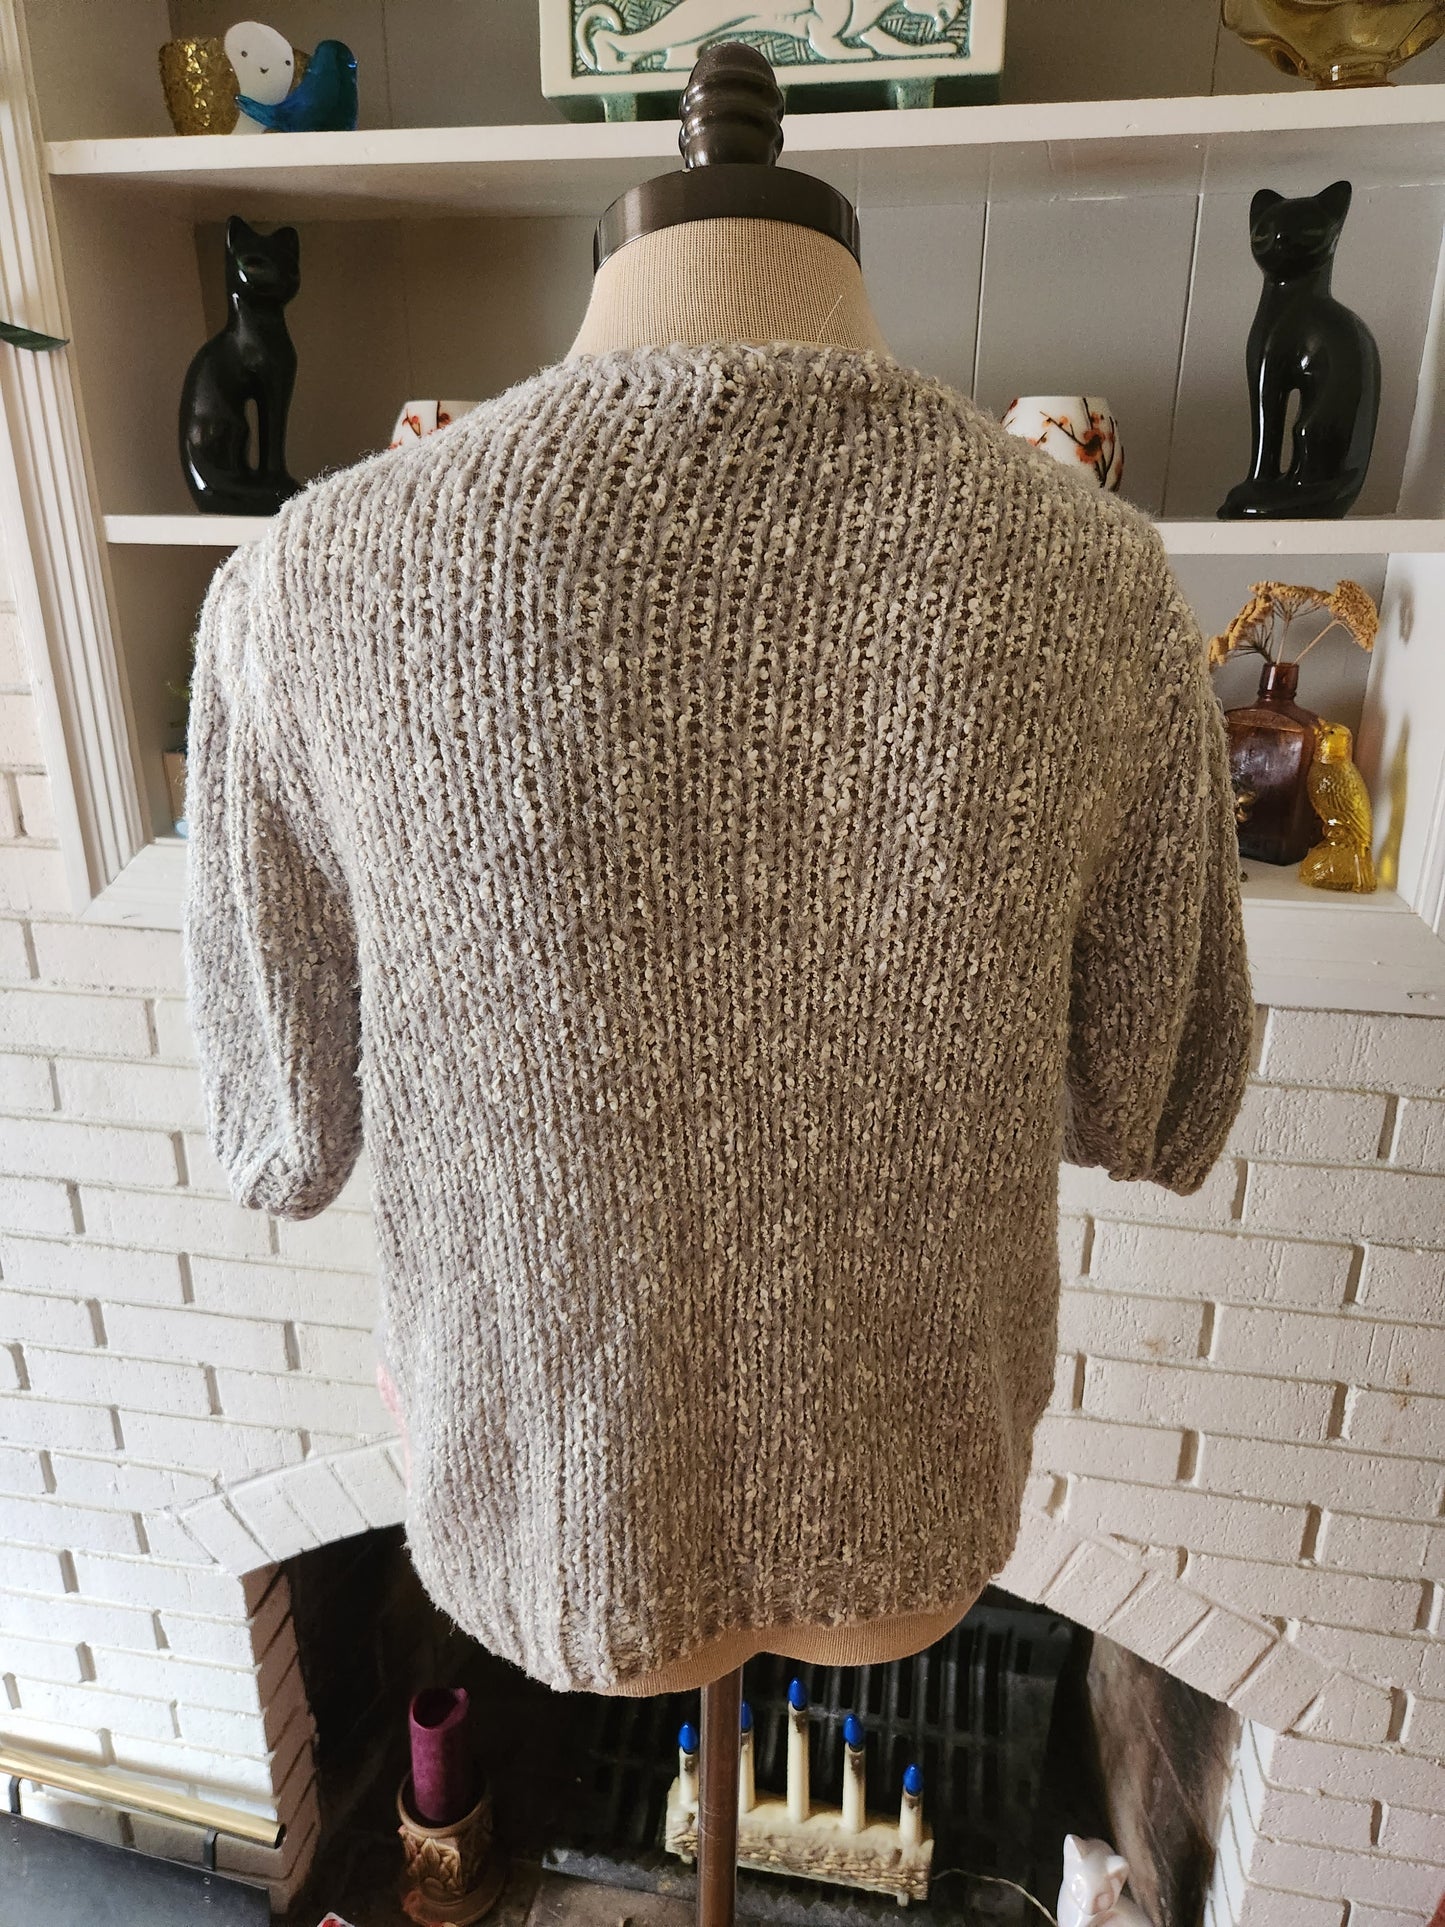 Vintage Gray and Pink Sweater by Donagain